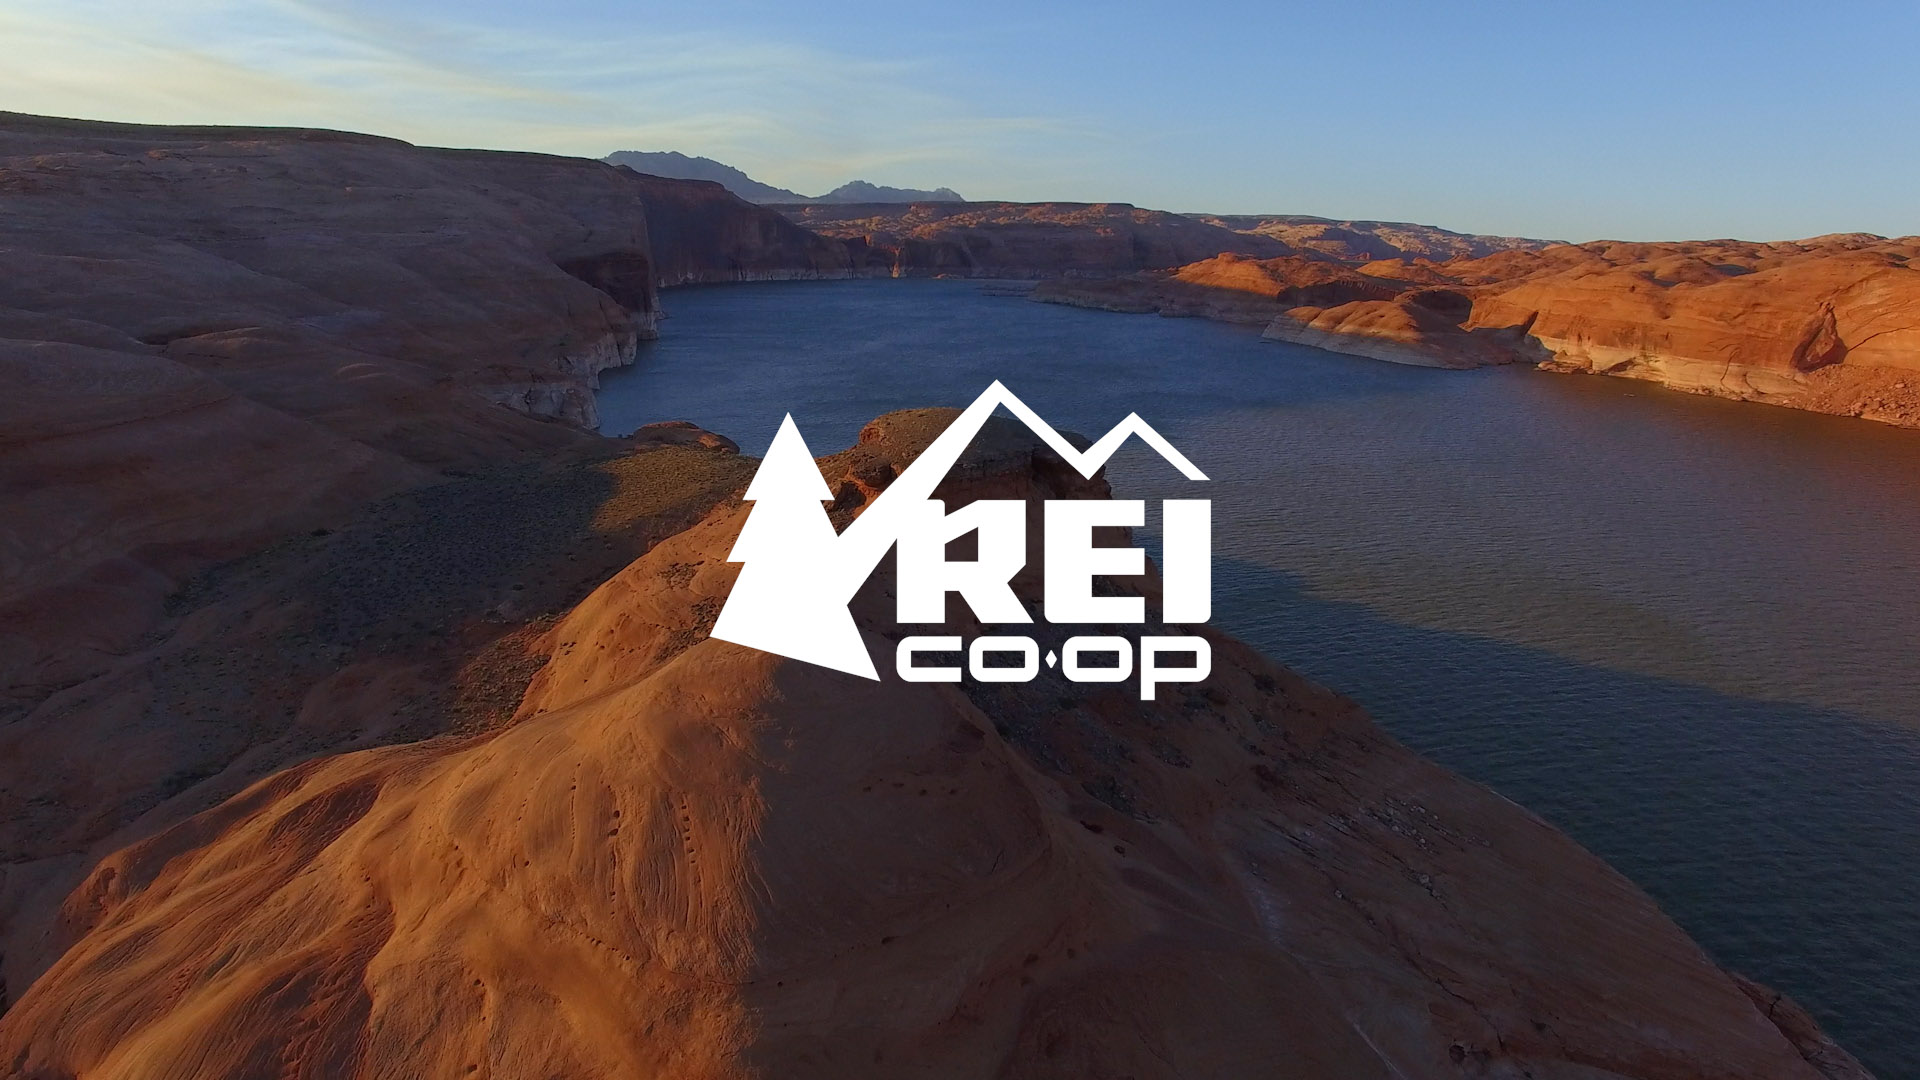 REI logo on top of river photo.